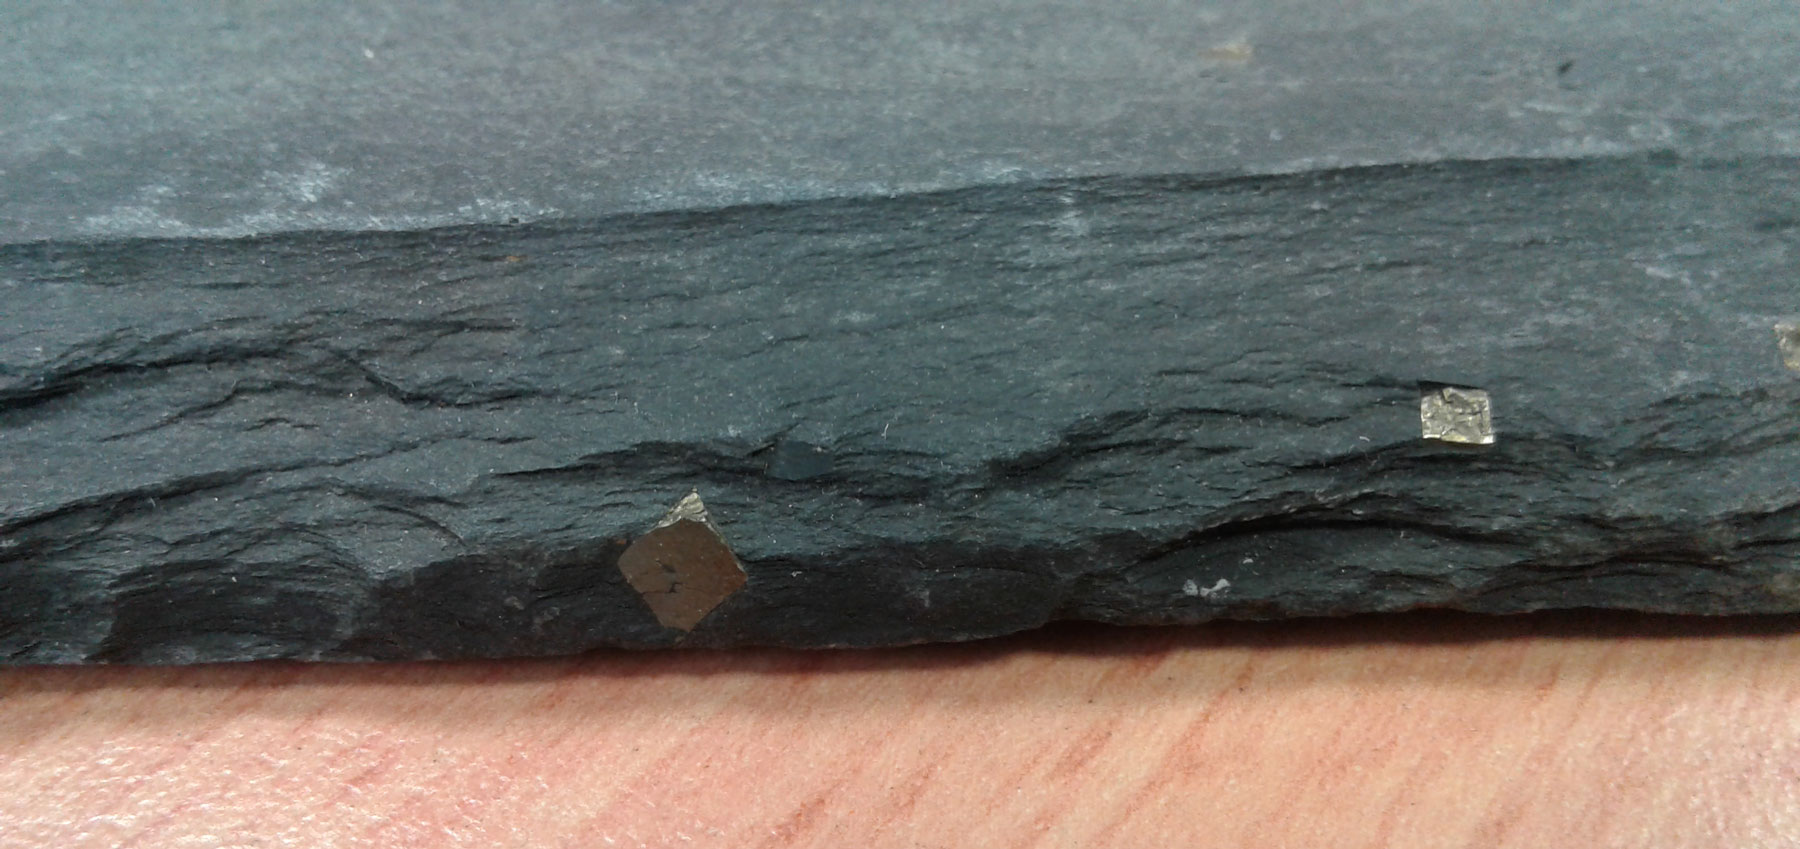 Cubic Pyrite - Markings on Roofing Slate